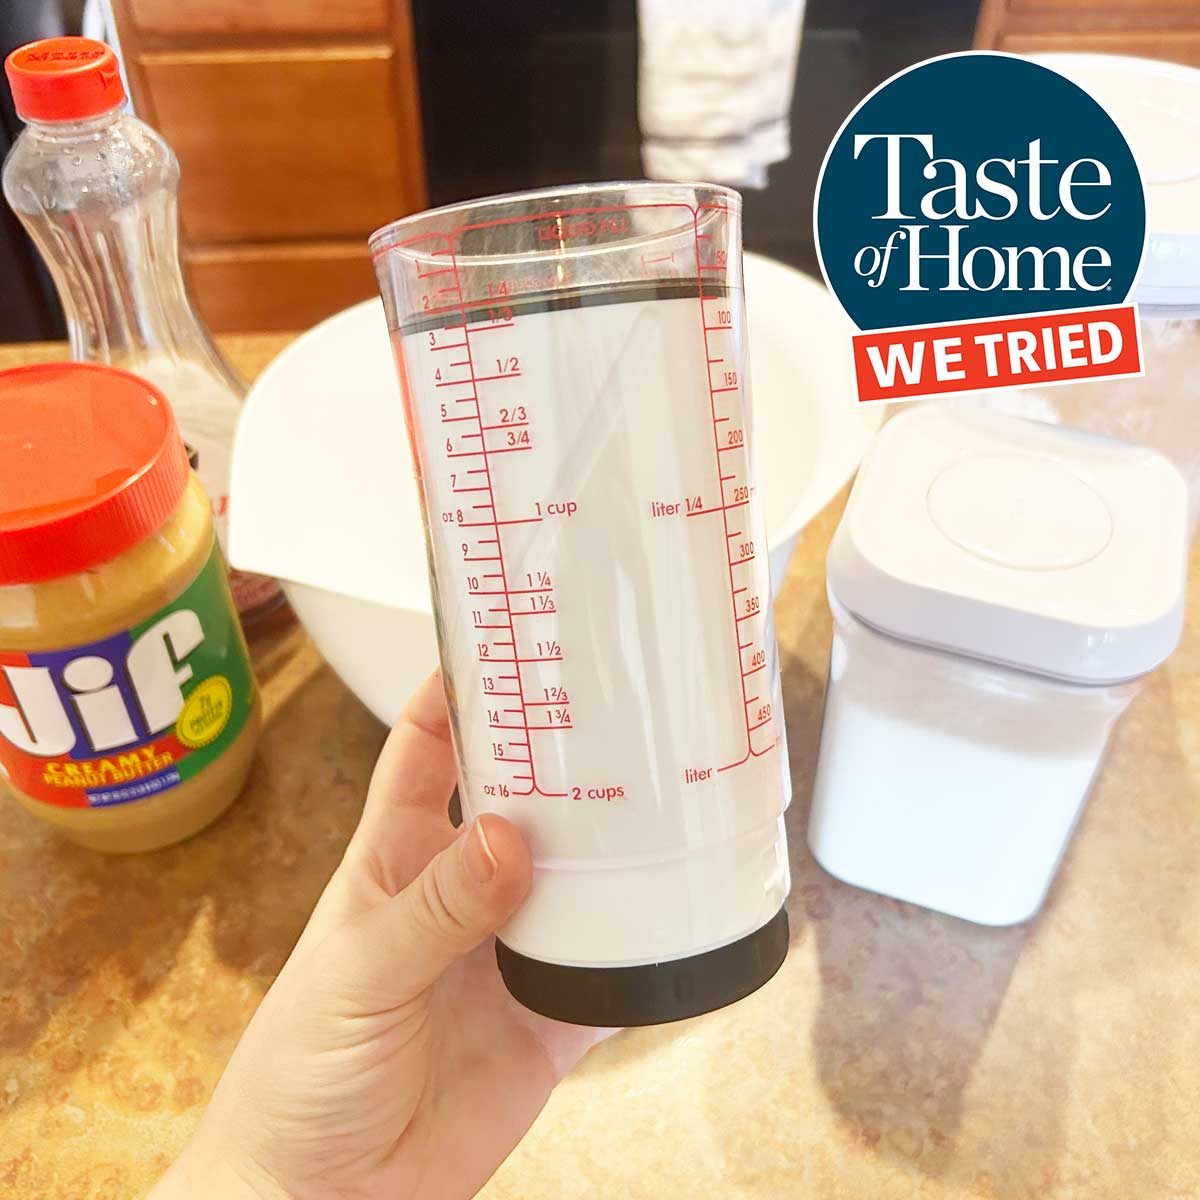 https://www.tasteofhome.com/wp-content/uploads/2023/06/TOH-We-Tried-measuring-cup-ecomm.jpg?fit=700%2C1024